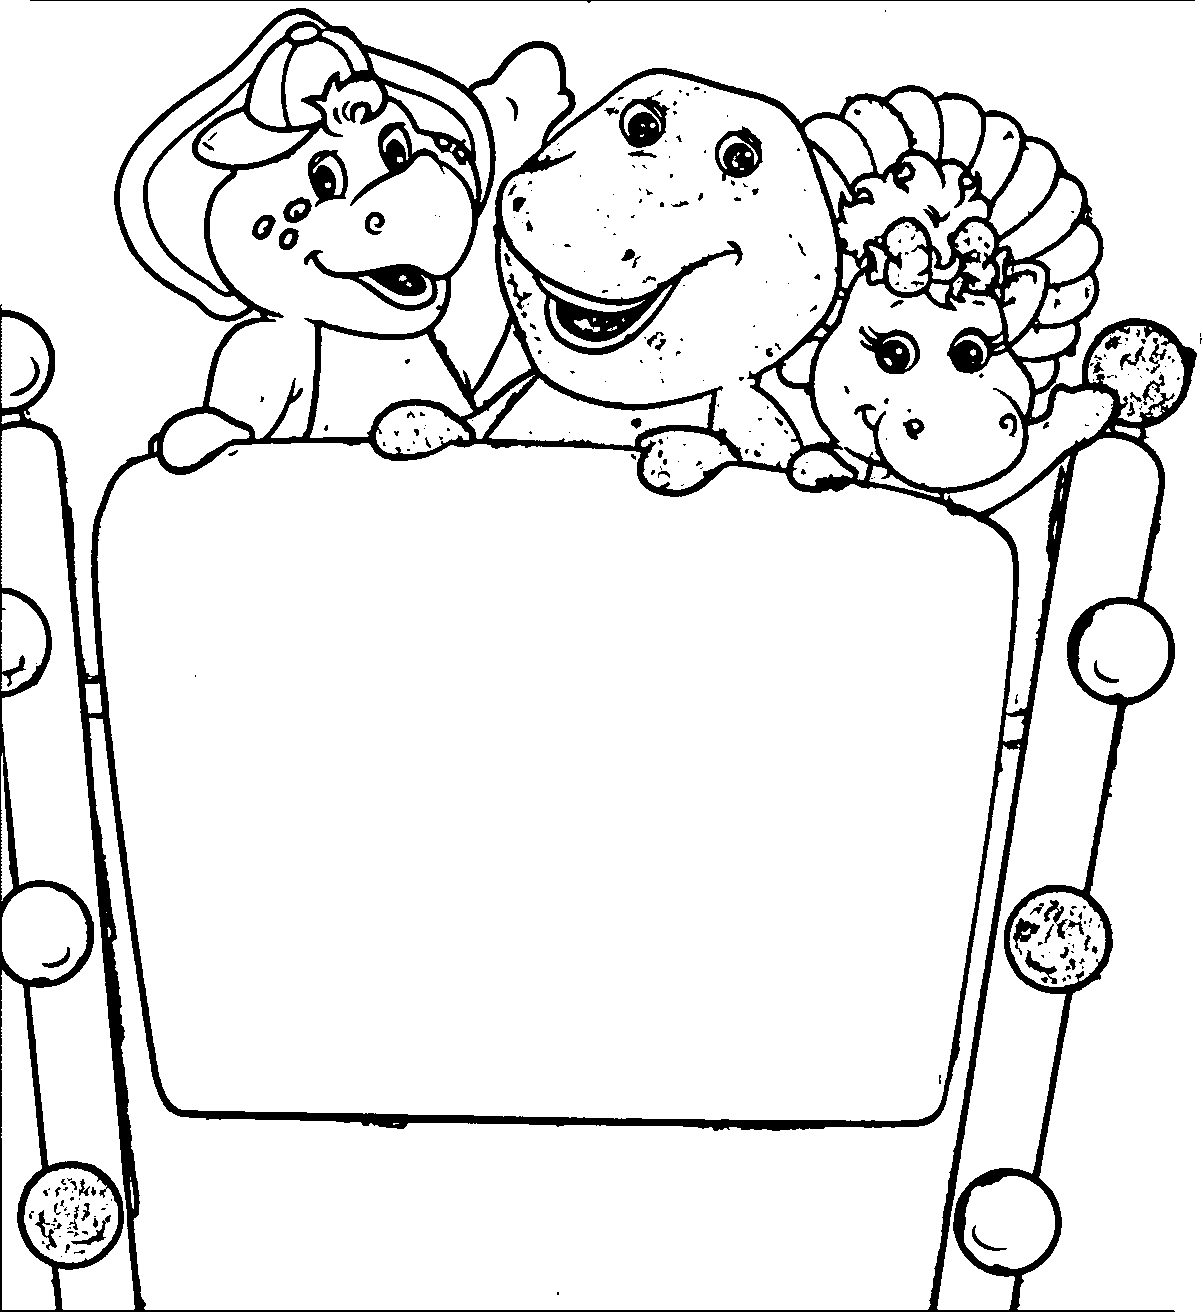 Barney Bj And Baby Bop At The Ferris Wheel Coloring Page ...